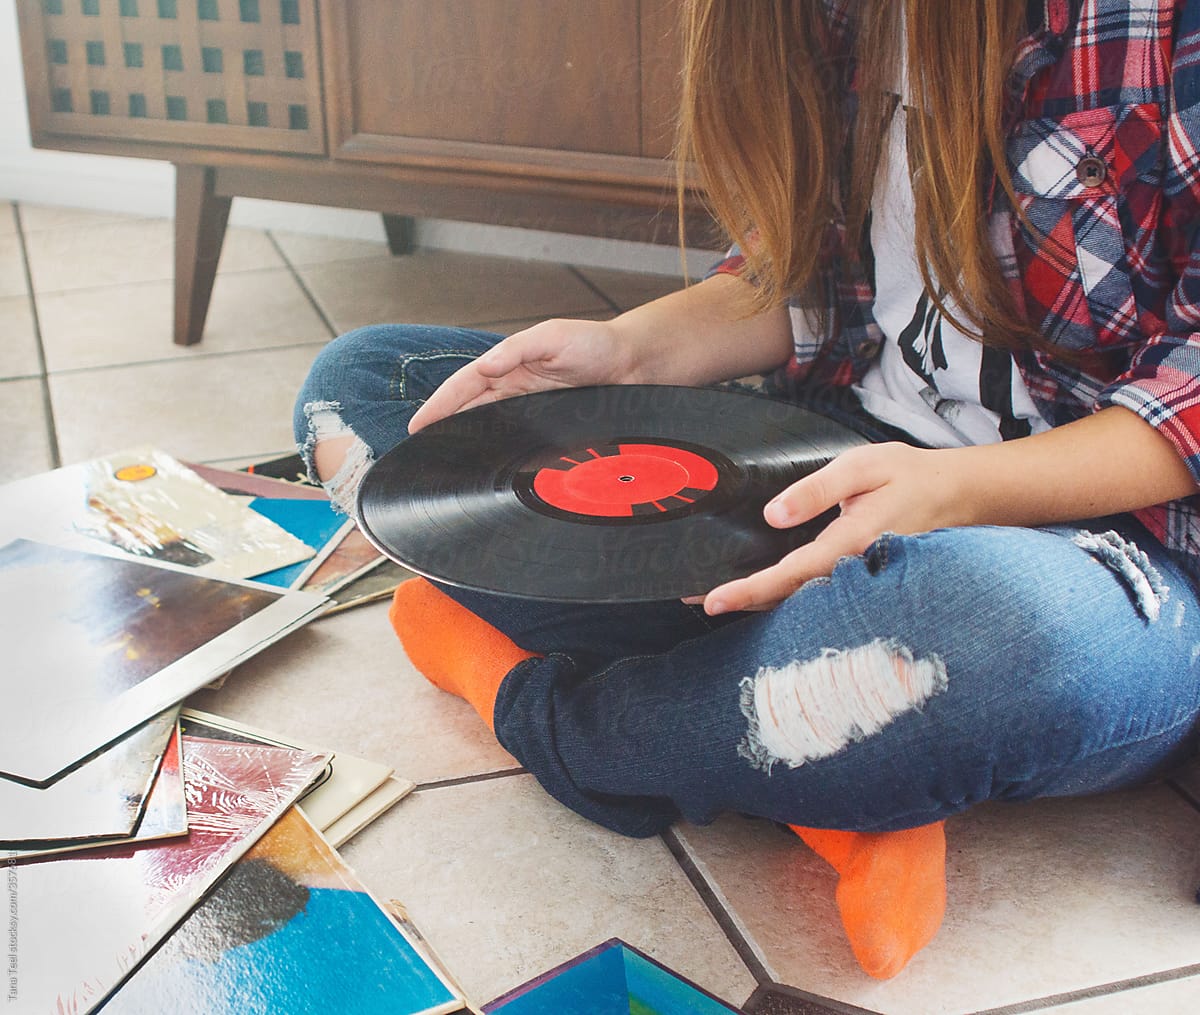 Teen holds 33 LP vinyl record while sitting on floor with albums